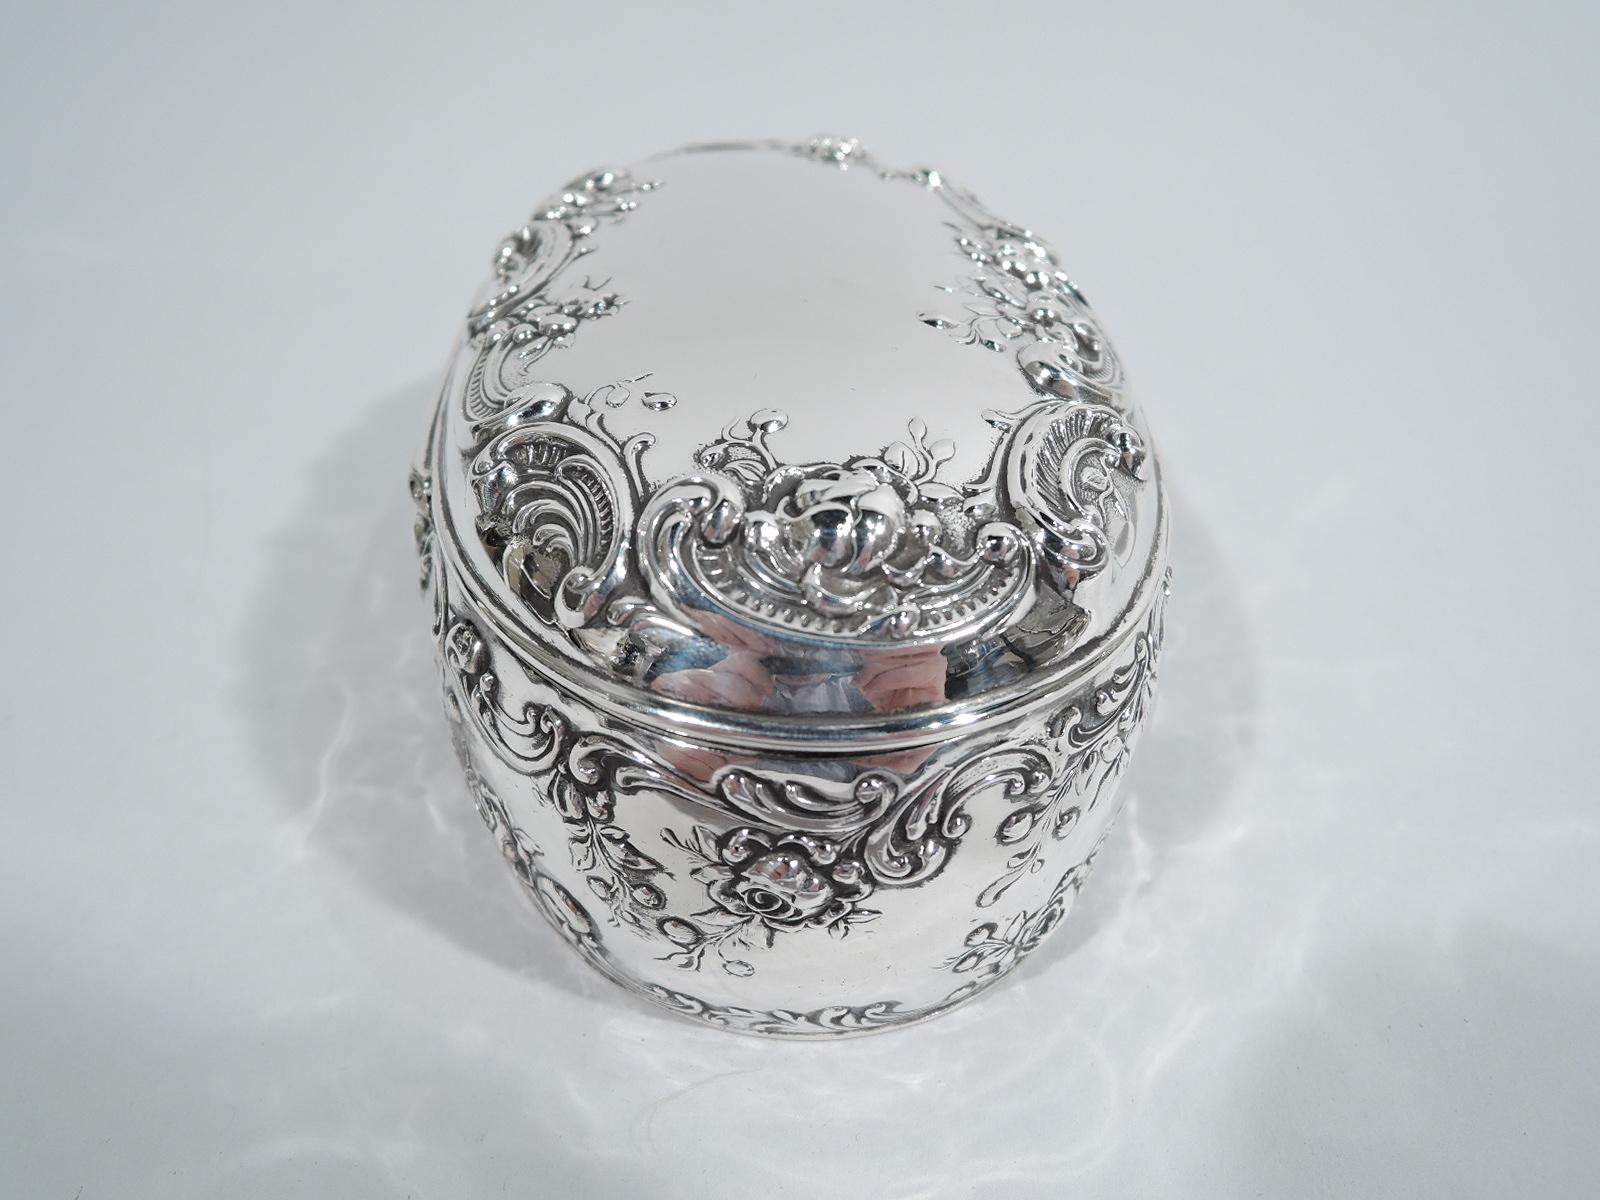 Turn-of-the-century Edwardian sterling silver jewelry box. Made by Gorham in Providence. Oval. Sides gently curved as is hinged cover. Pretty and lively ornament in form of chased scrolls and flowers. Cover top center vacant. Box interior has fitted